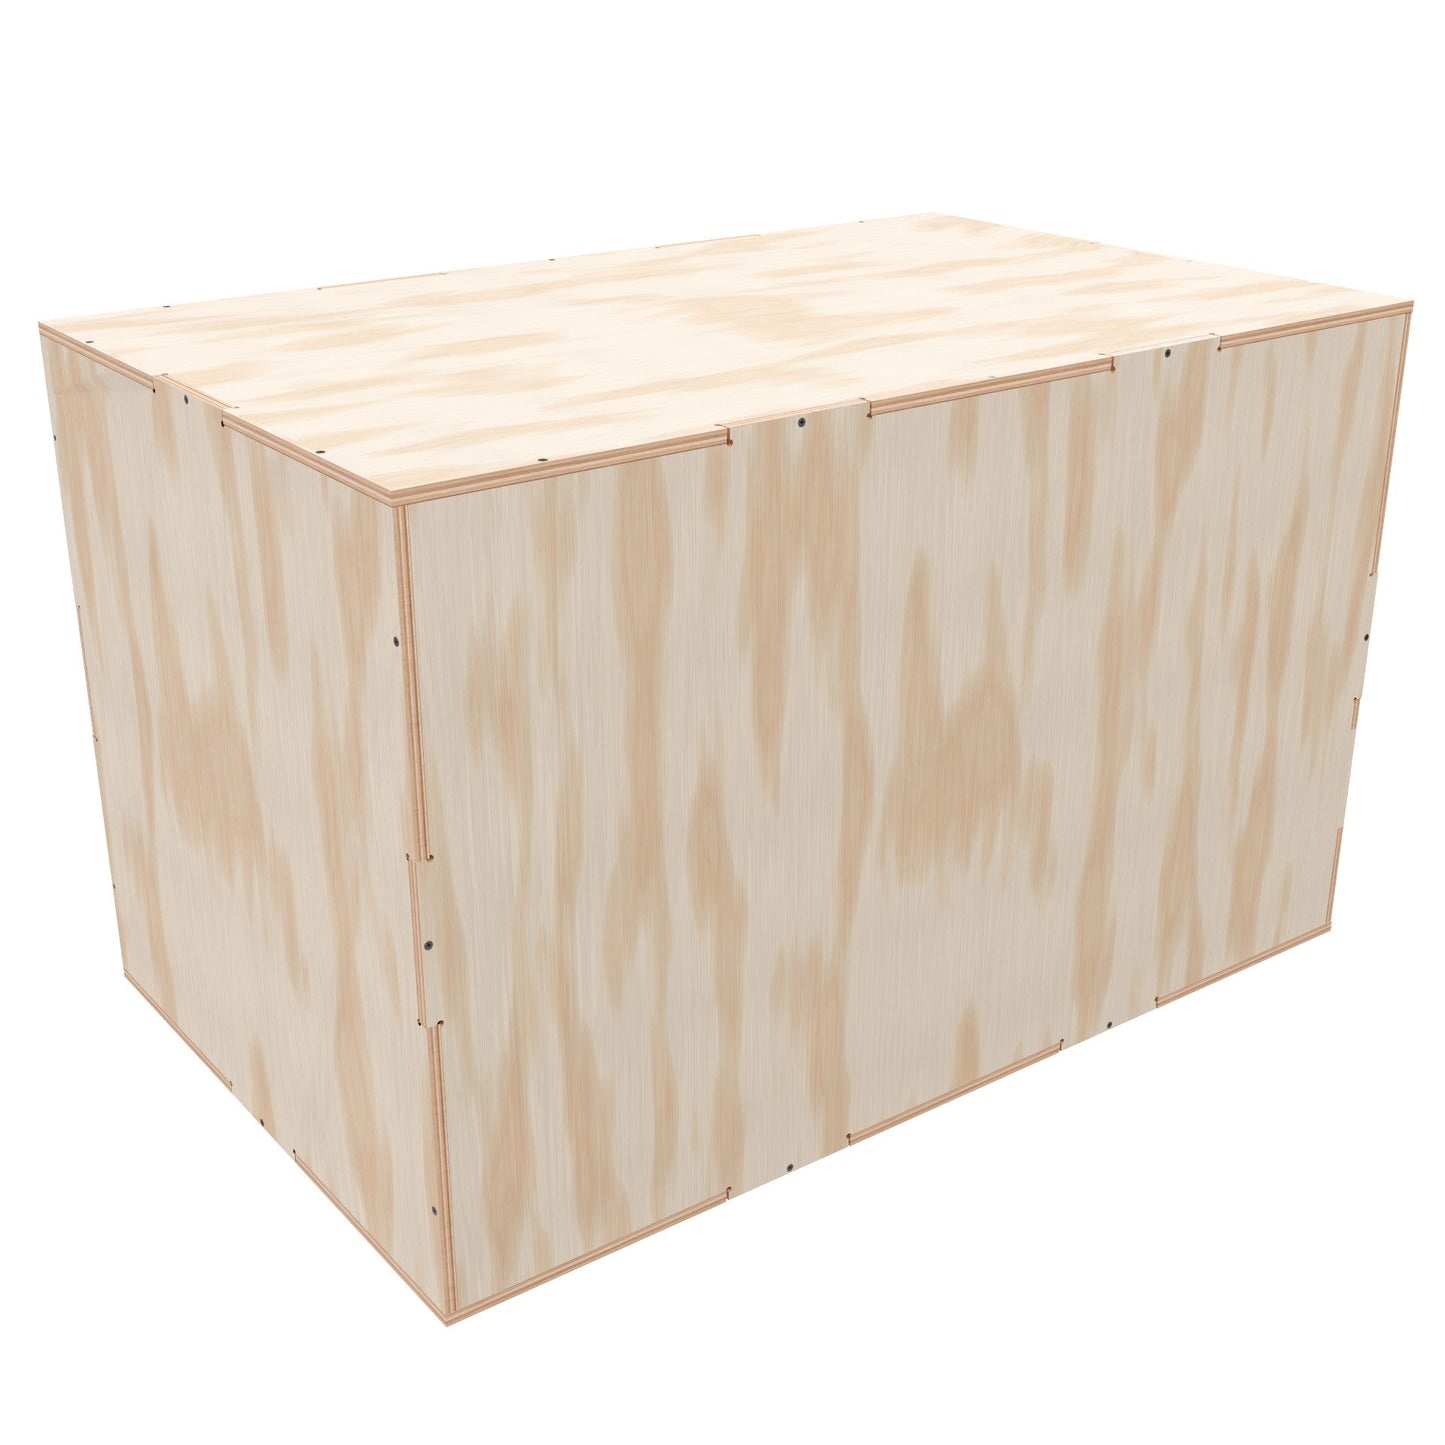 Plywood Shipping Crate 47x30x30